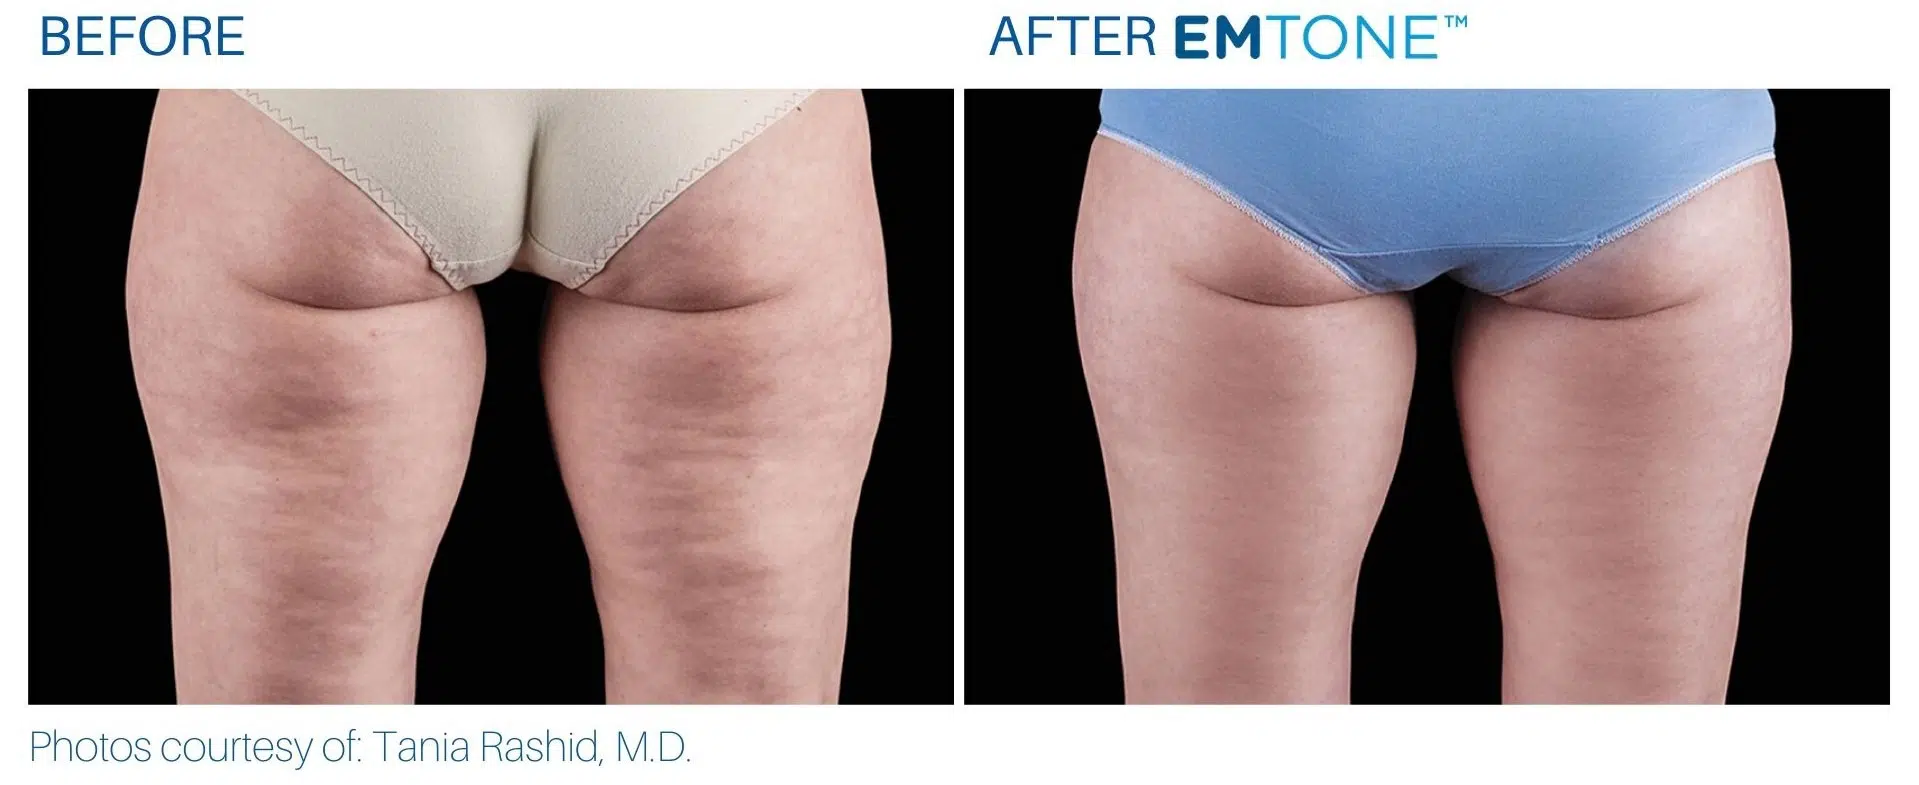 EMTONE BEFORE AND AFTER